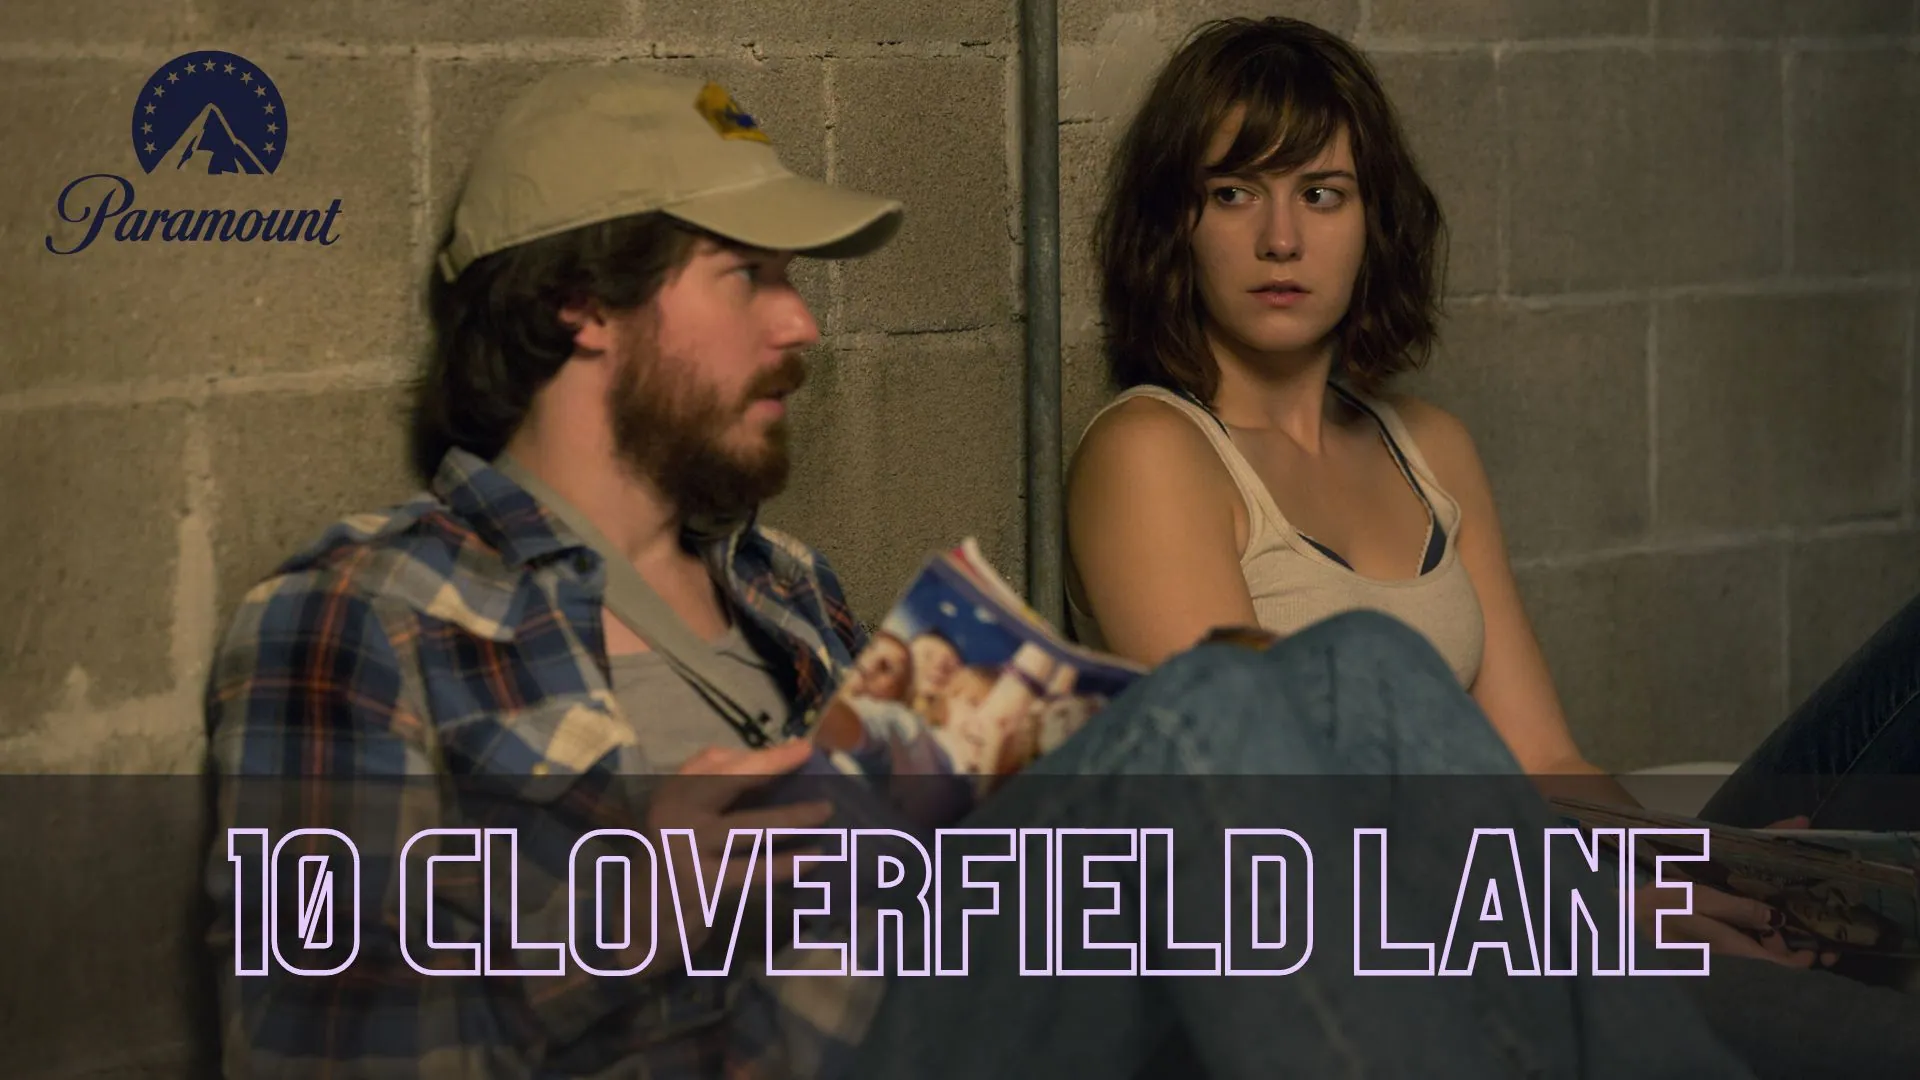 10 Cloverfield Lane Parents Guide | Age Rating (2016)